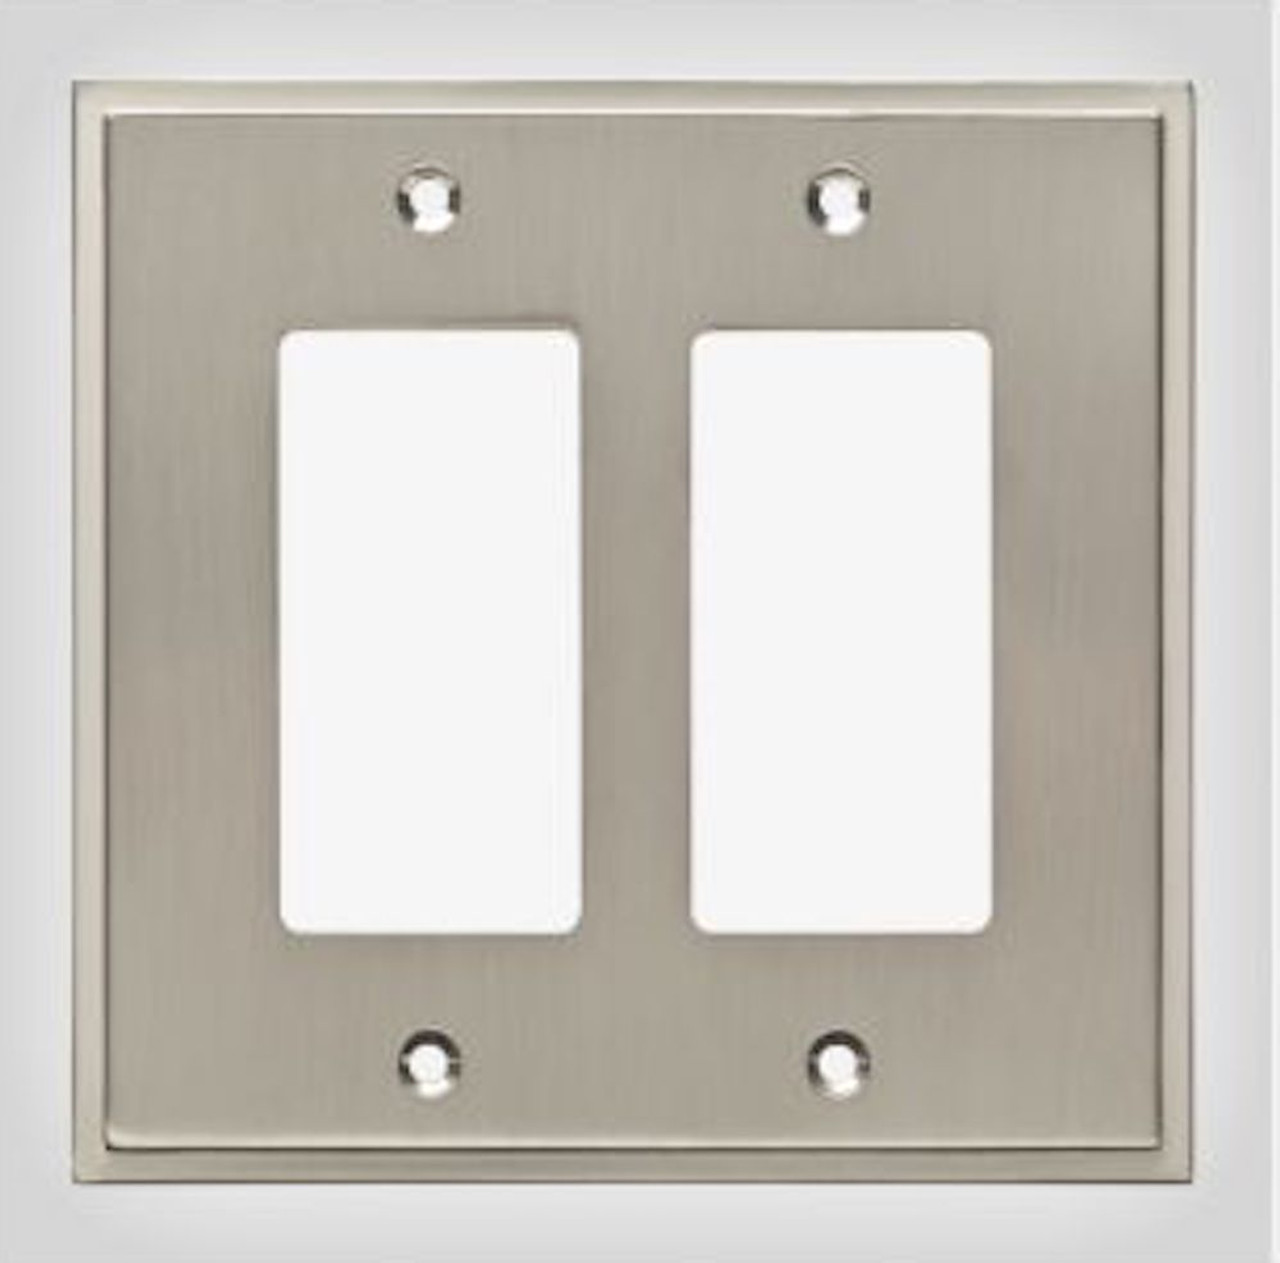 Brainerd 787400 Simple Step Double GFCI Cover Plate Satin Nickel